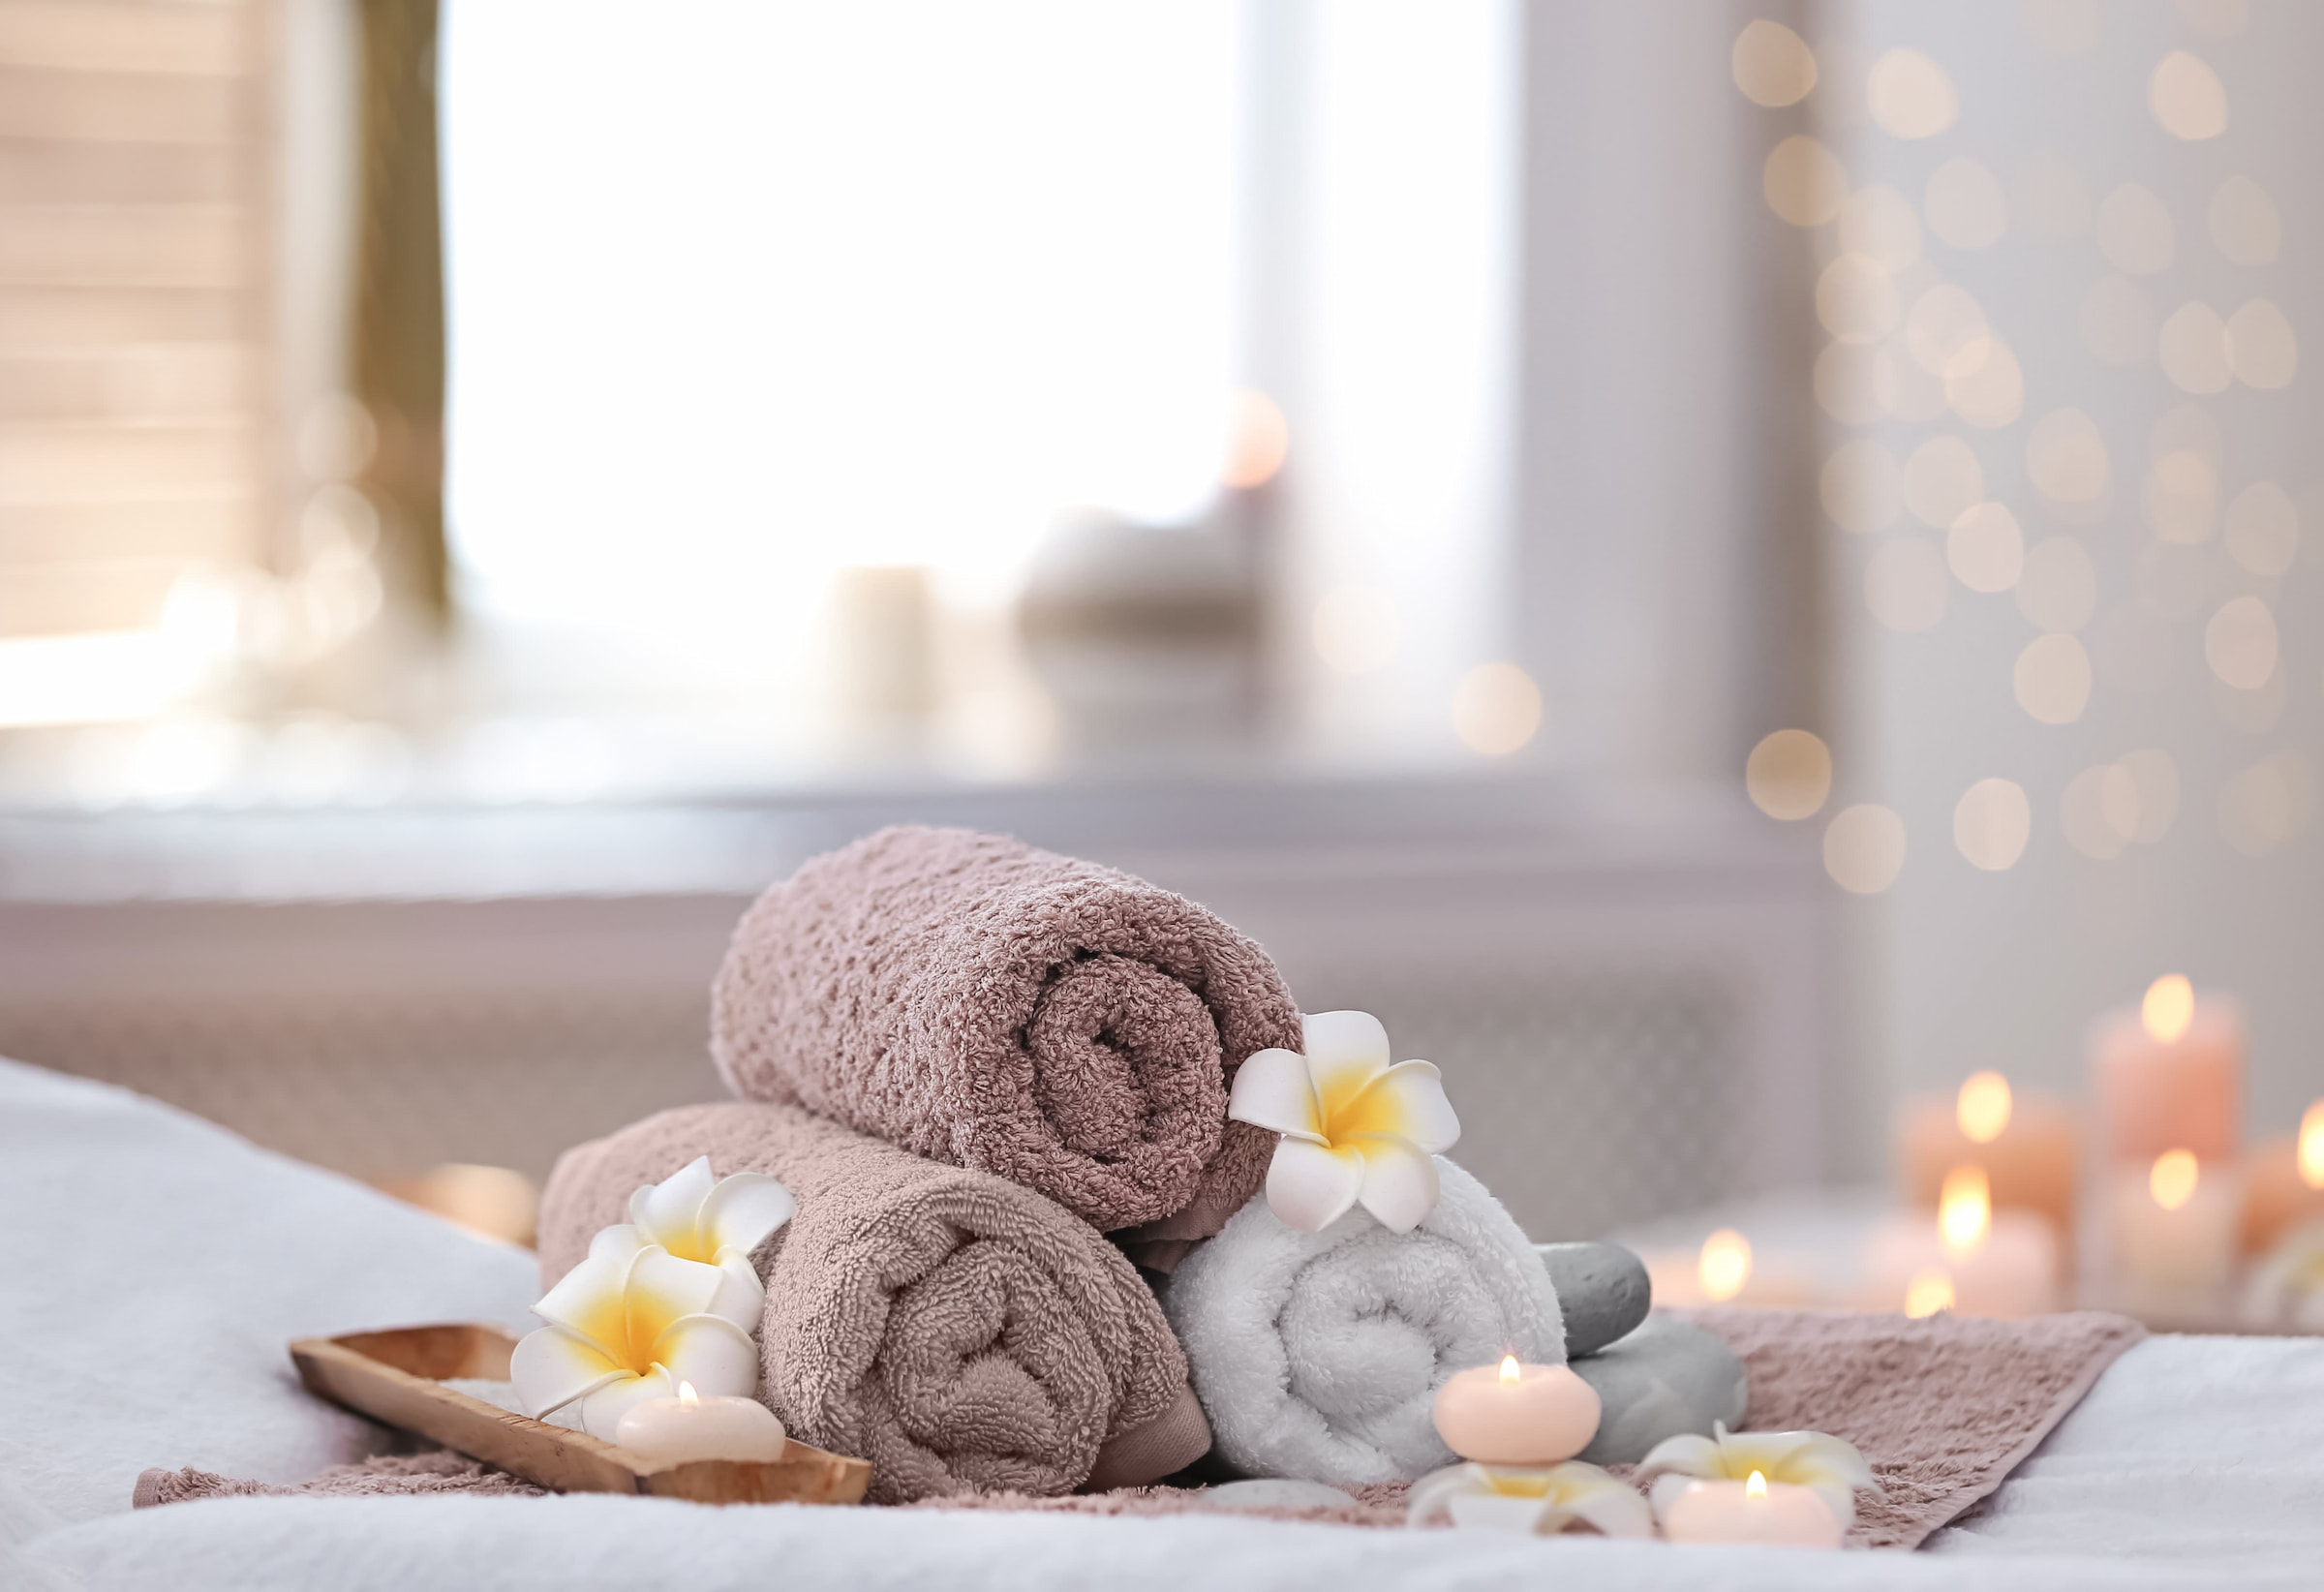 hotel spa rolled towels soaps candles luxury